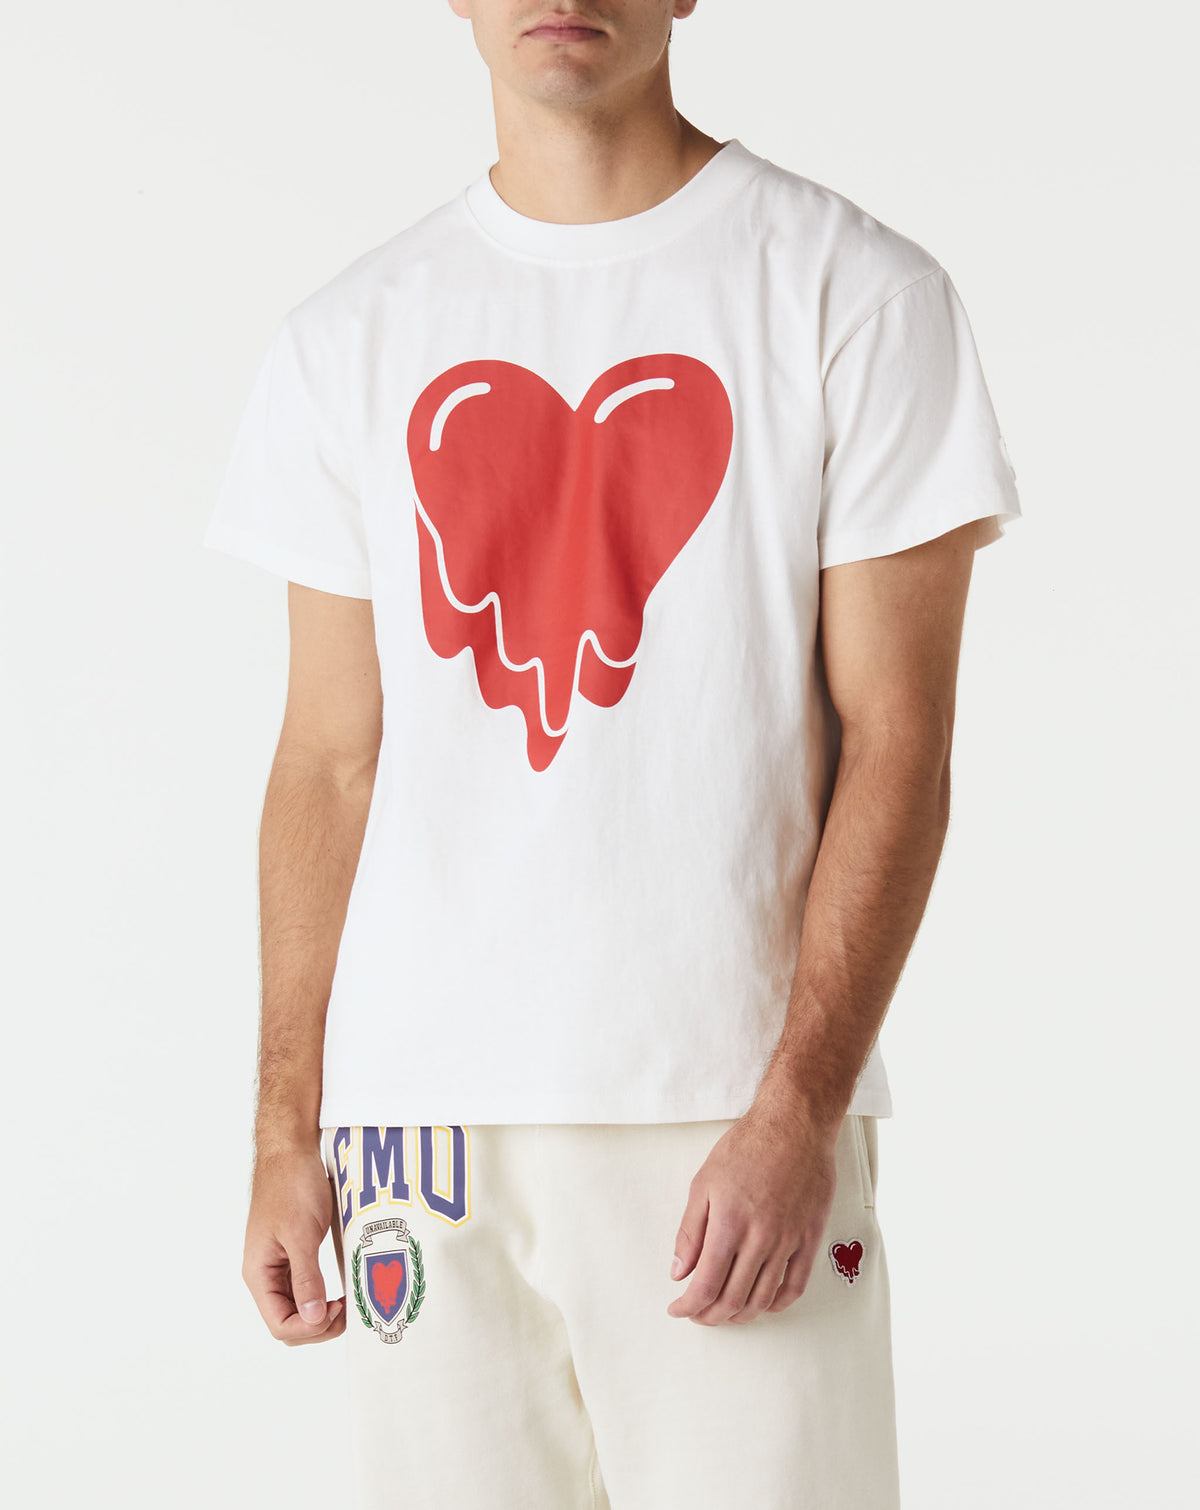 Emotionally Unavailable Heart Logo T-Shirt - Rule of Next Apparel